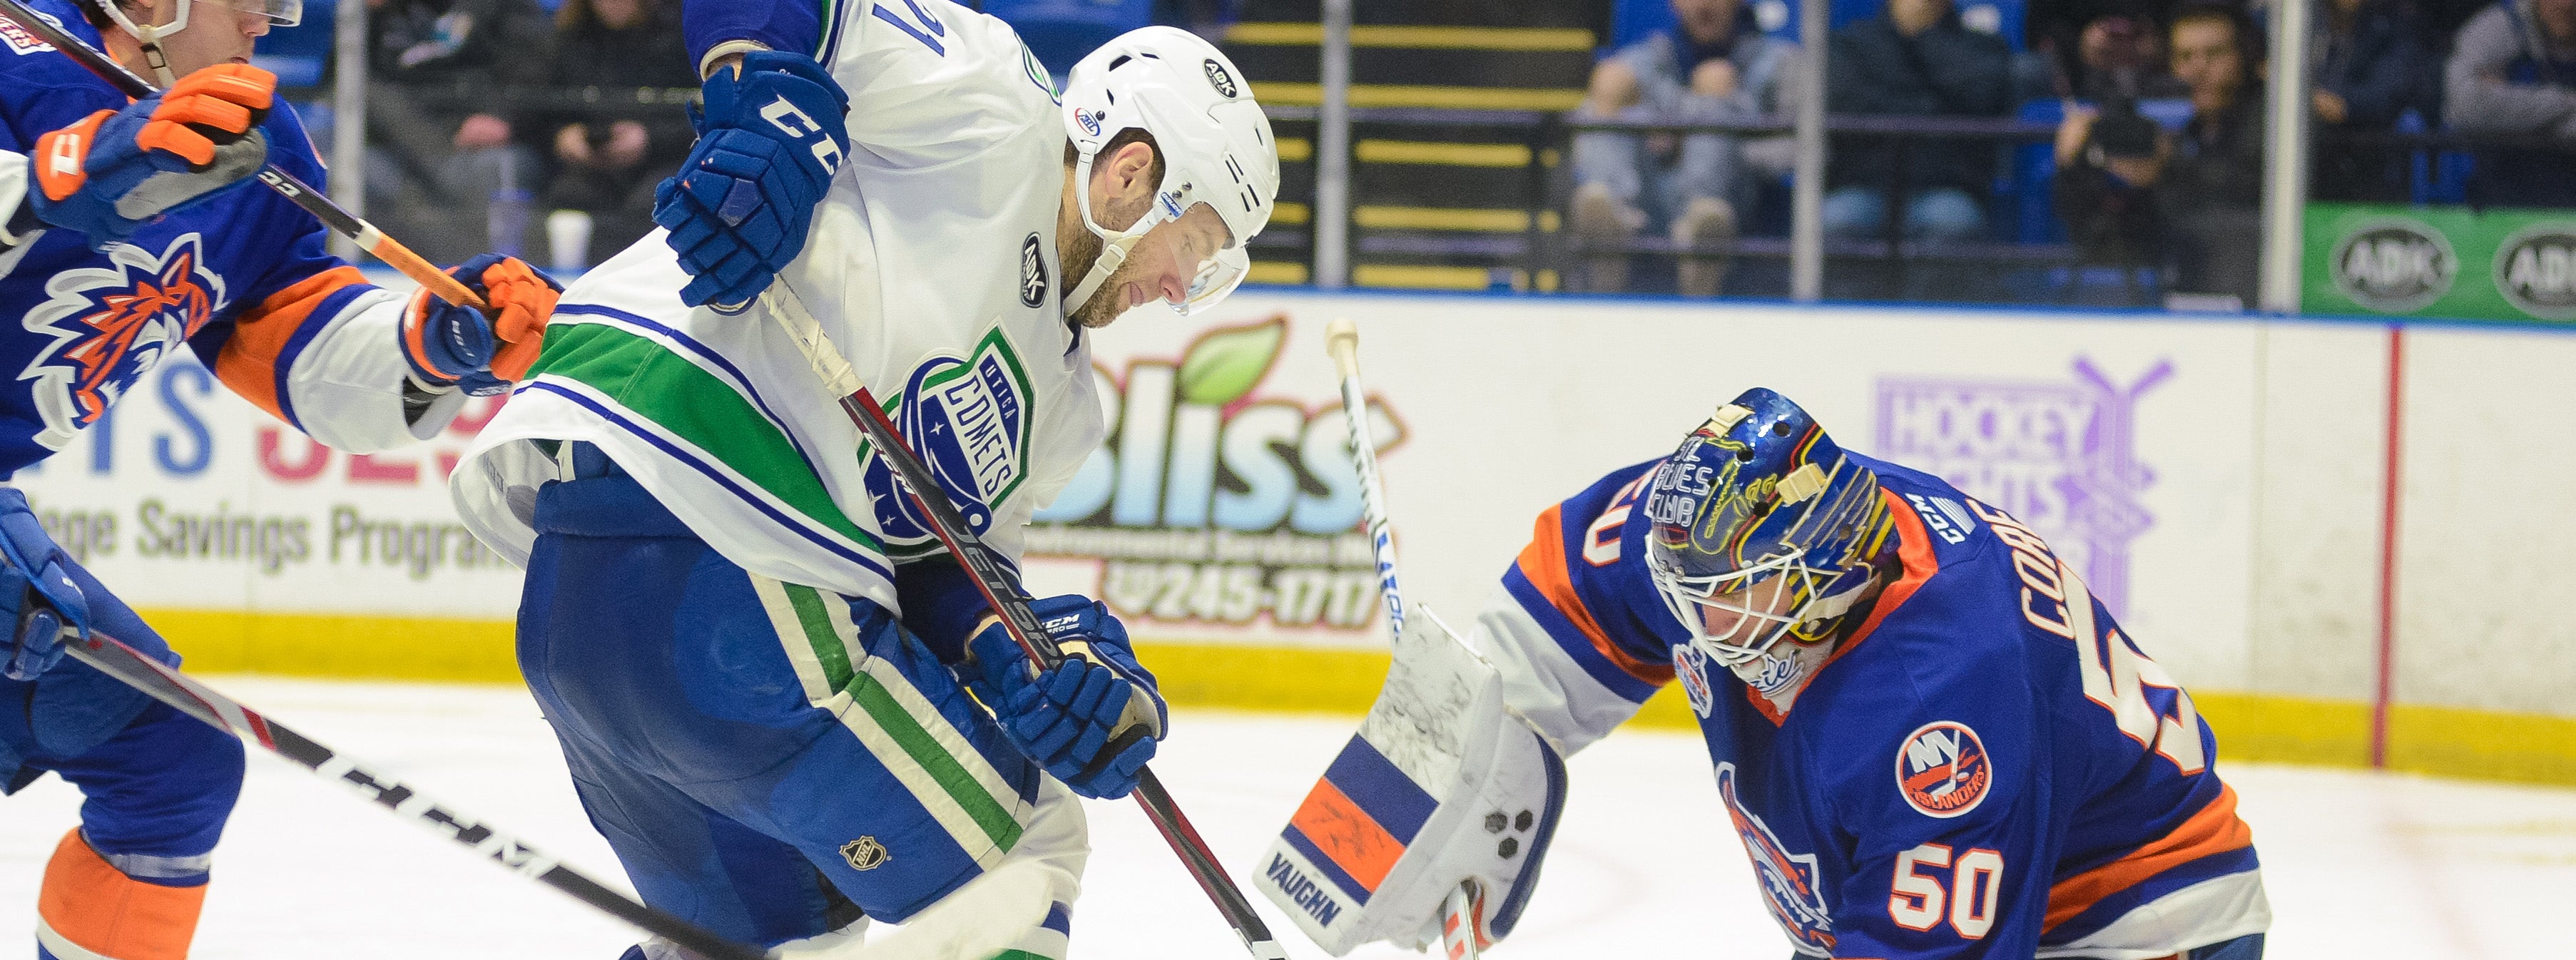 COMETS BATTLE SOUND TIGERS FOR THIRD TIME